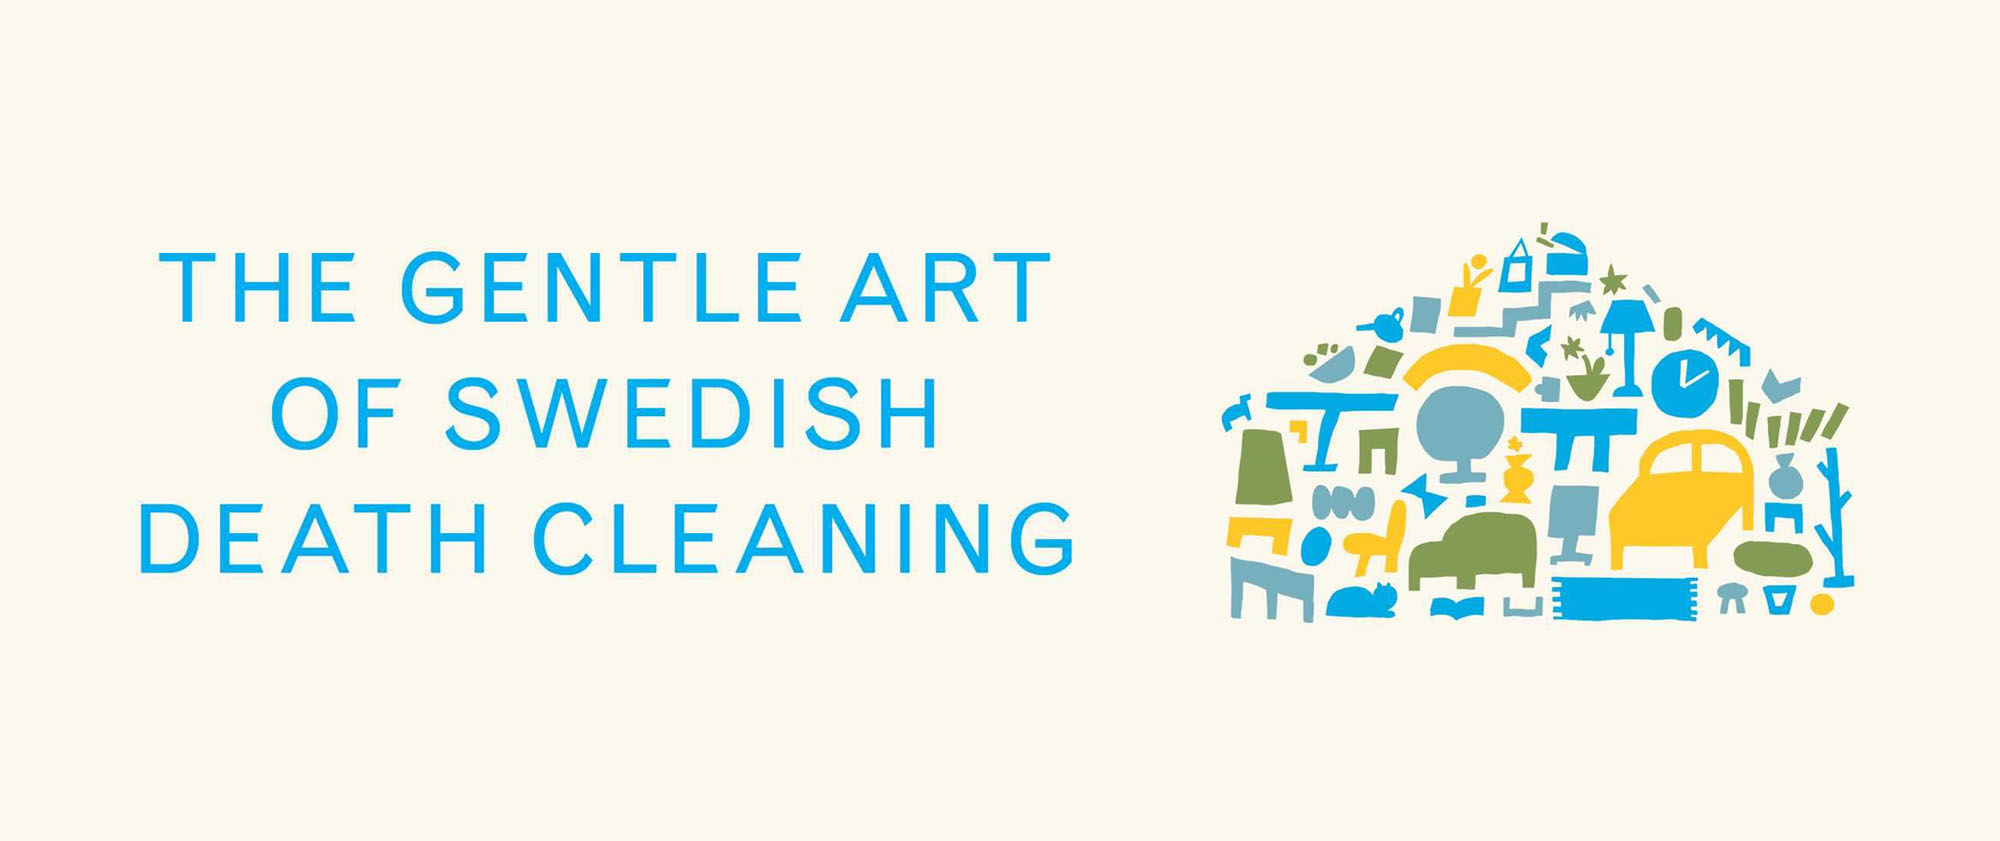 Book Review: The Gentle Art of Swedish Death Cleaning by Margareta Magnusson